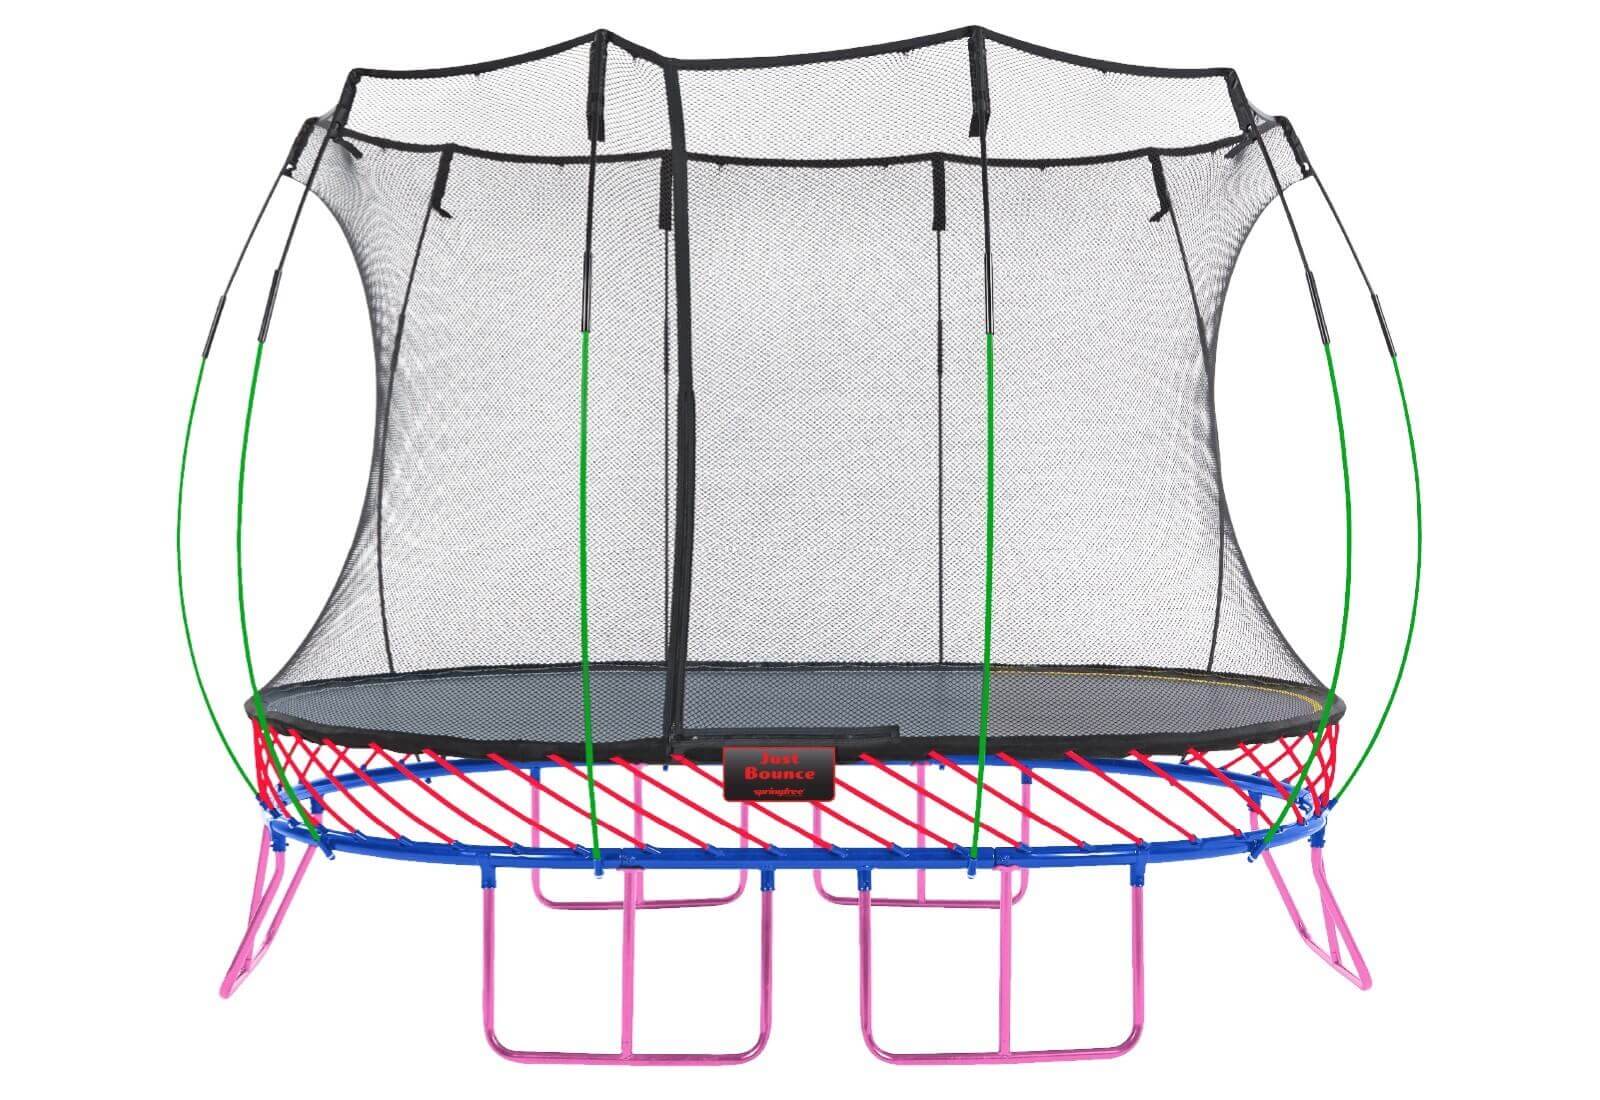 A Springfree custom trampoline designed with pink, blue, red and green colors